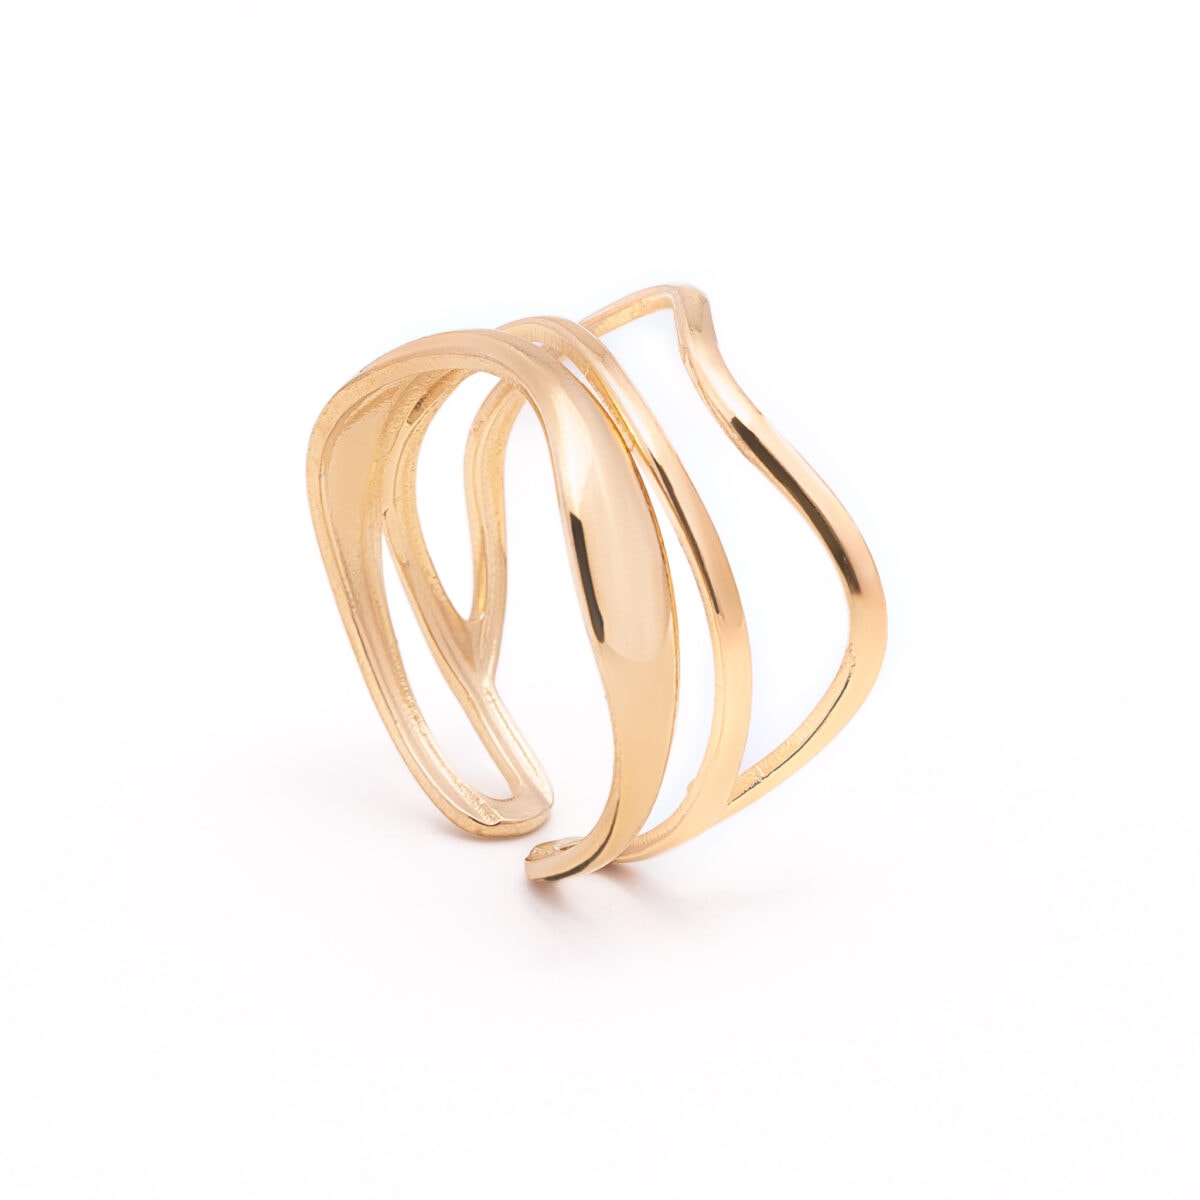 https://m.clubbella.co/product/aura-spriral-gold-ring/ Aura Spriral Ring